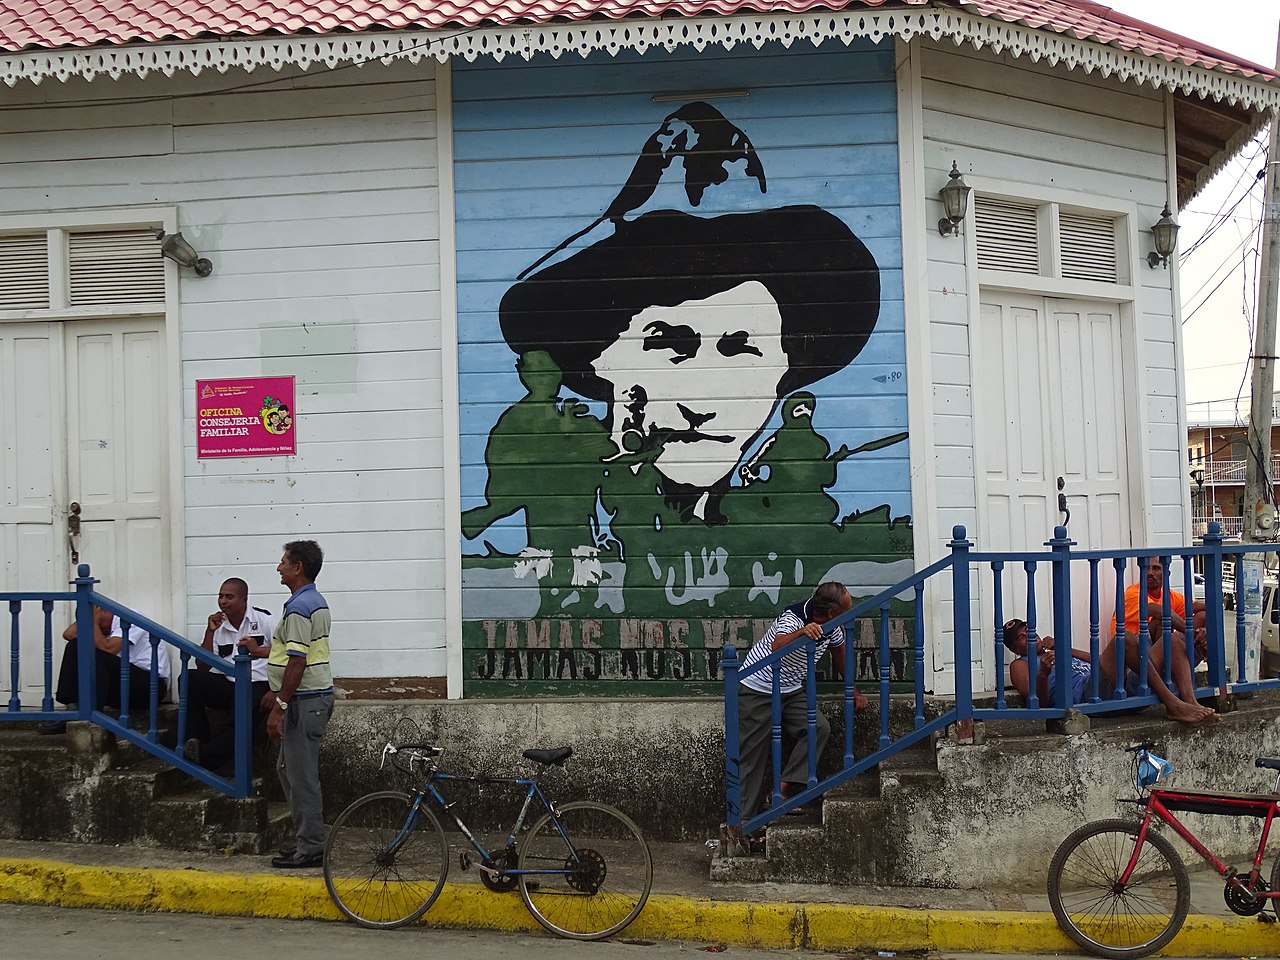 Mural of Sandino located in Playa Hermosa, Nicaragua, with writing that states “They will never defeat us”, 2016. 